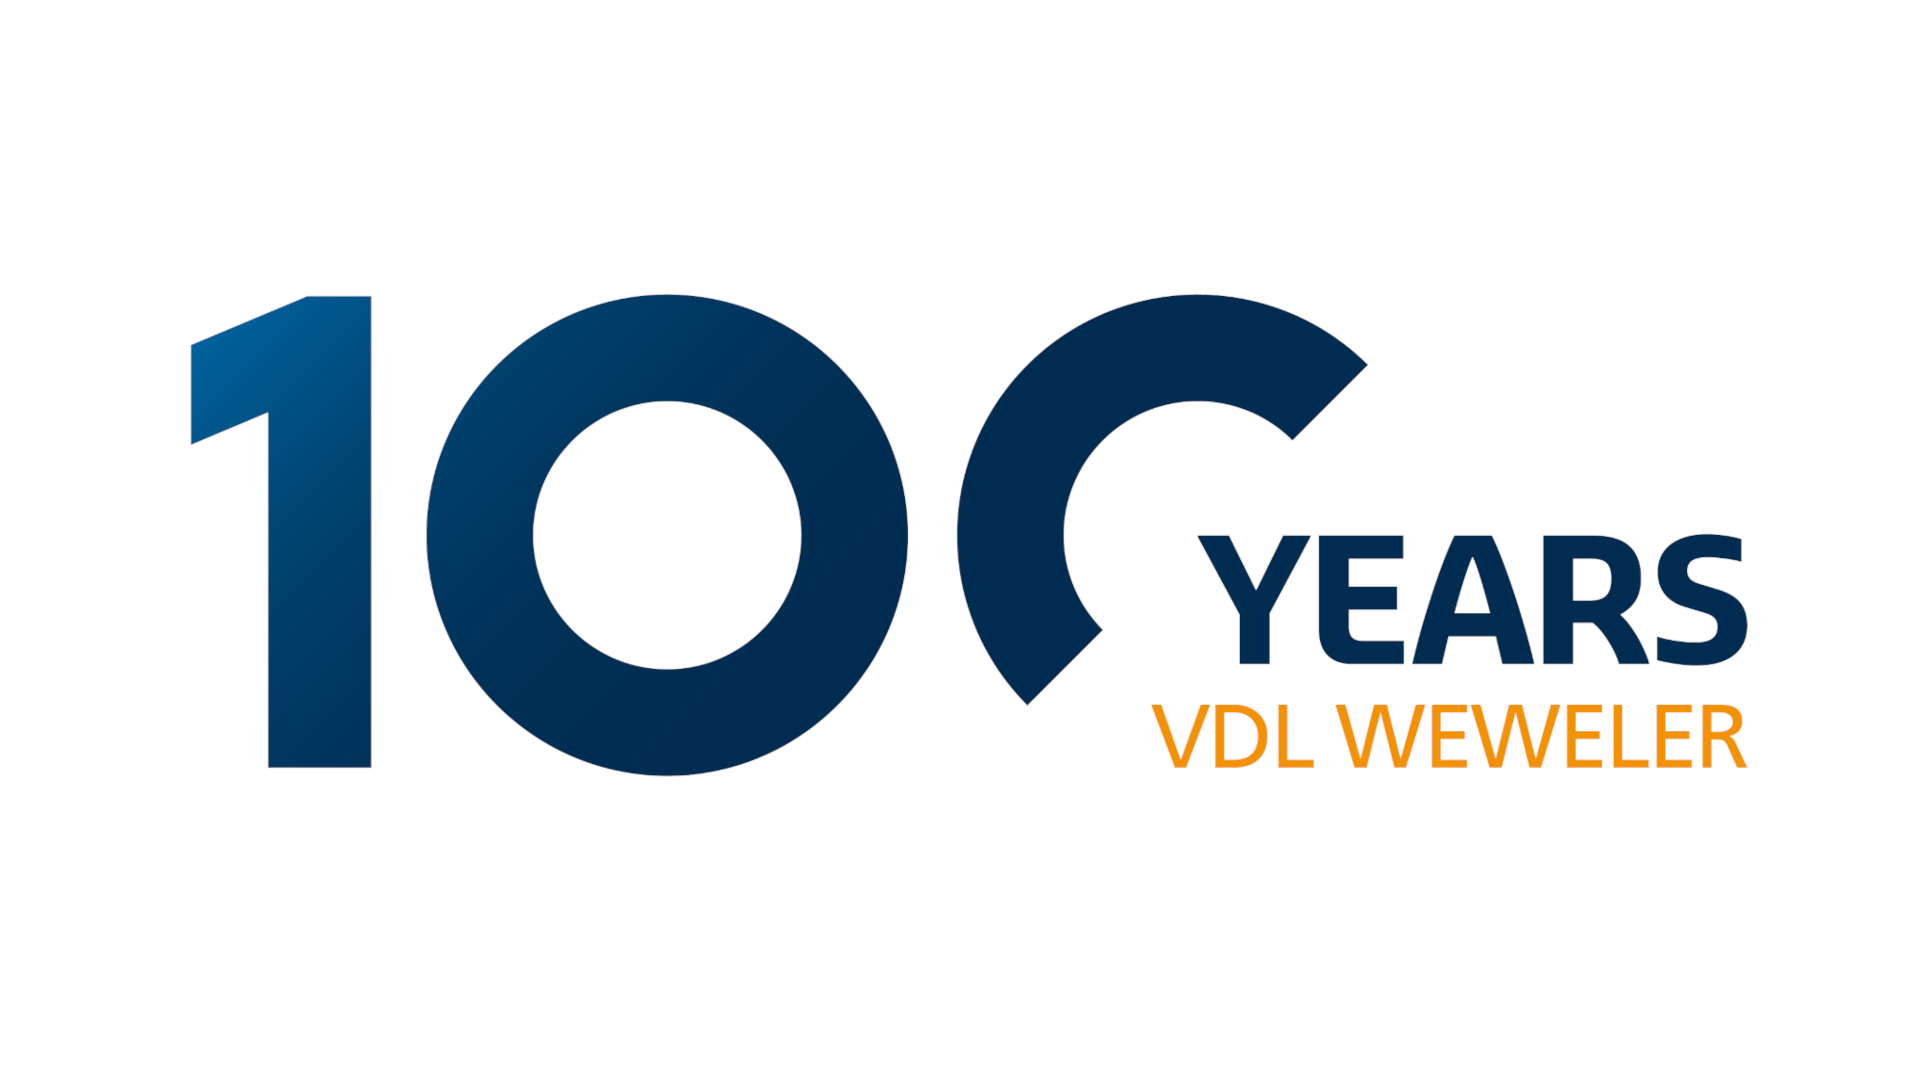 VDL Weweler 100 Years